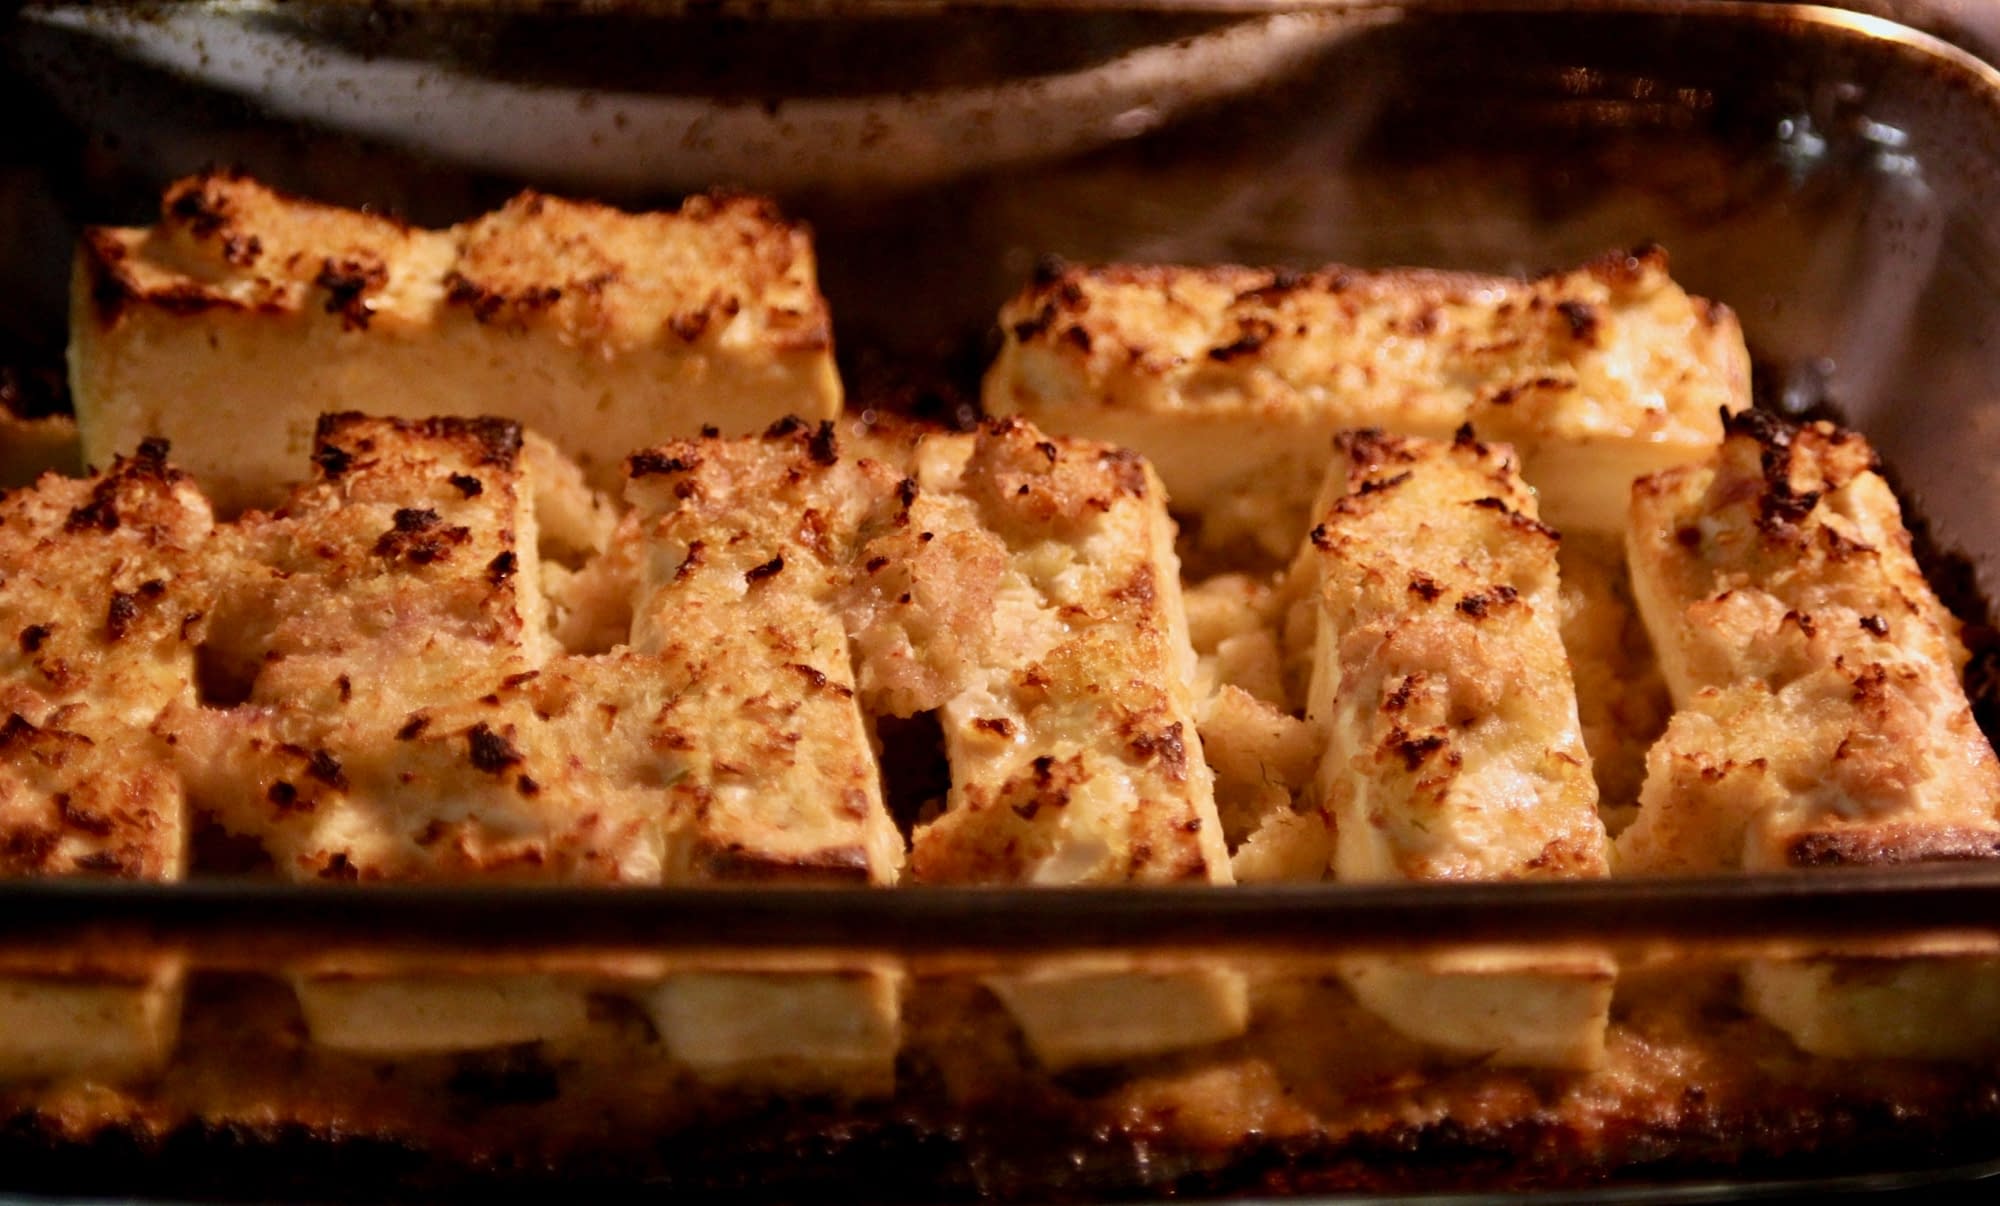 Roasted tofu turning golden brown in the oven and ready to serve on top of the beans and kale